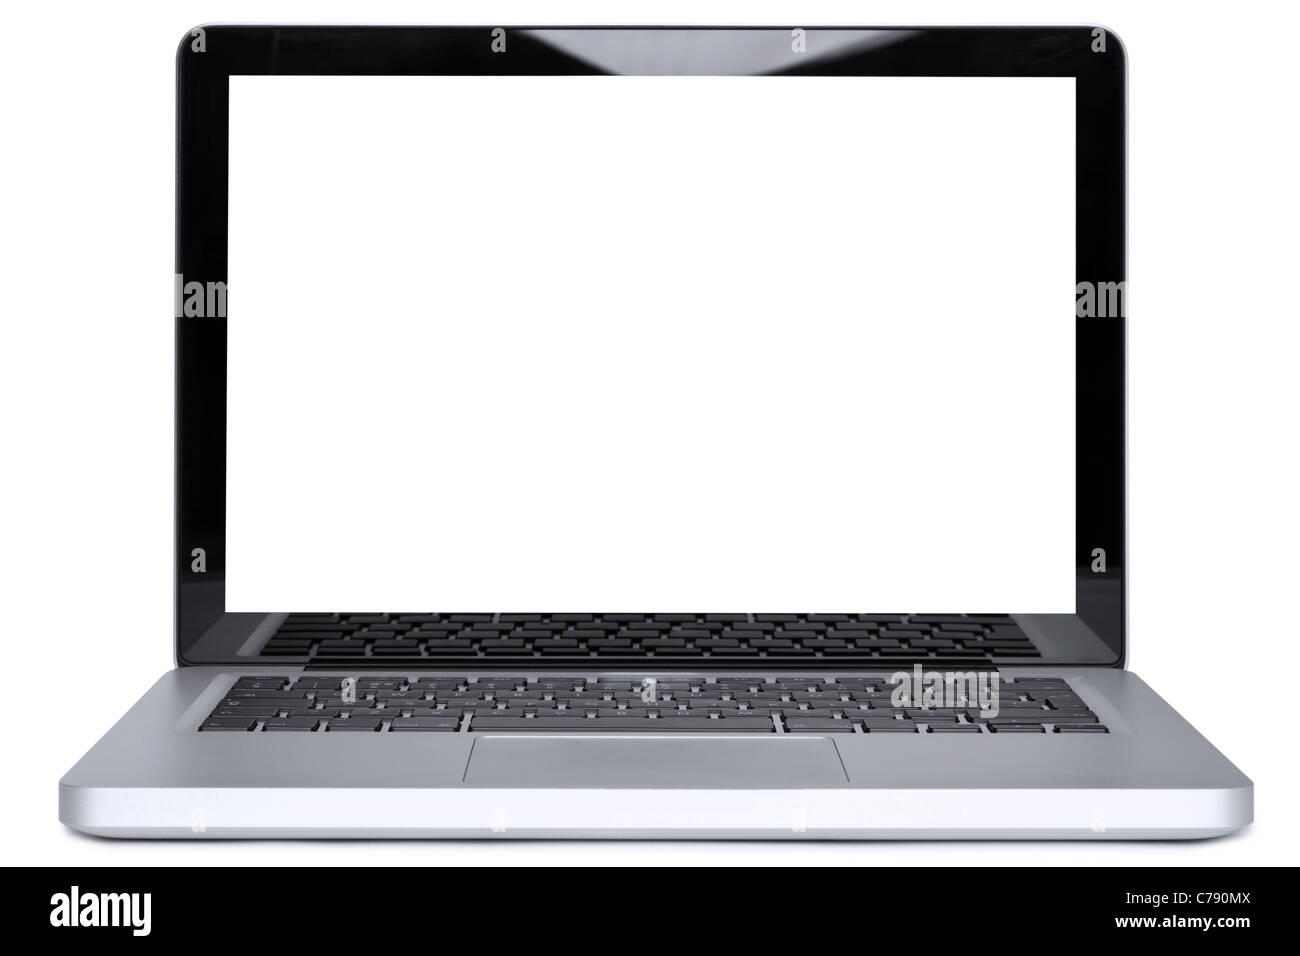 An unbranded new laptop computer, isolated on a white background with clipping paths for the laptop and the screen Stock Photo